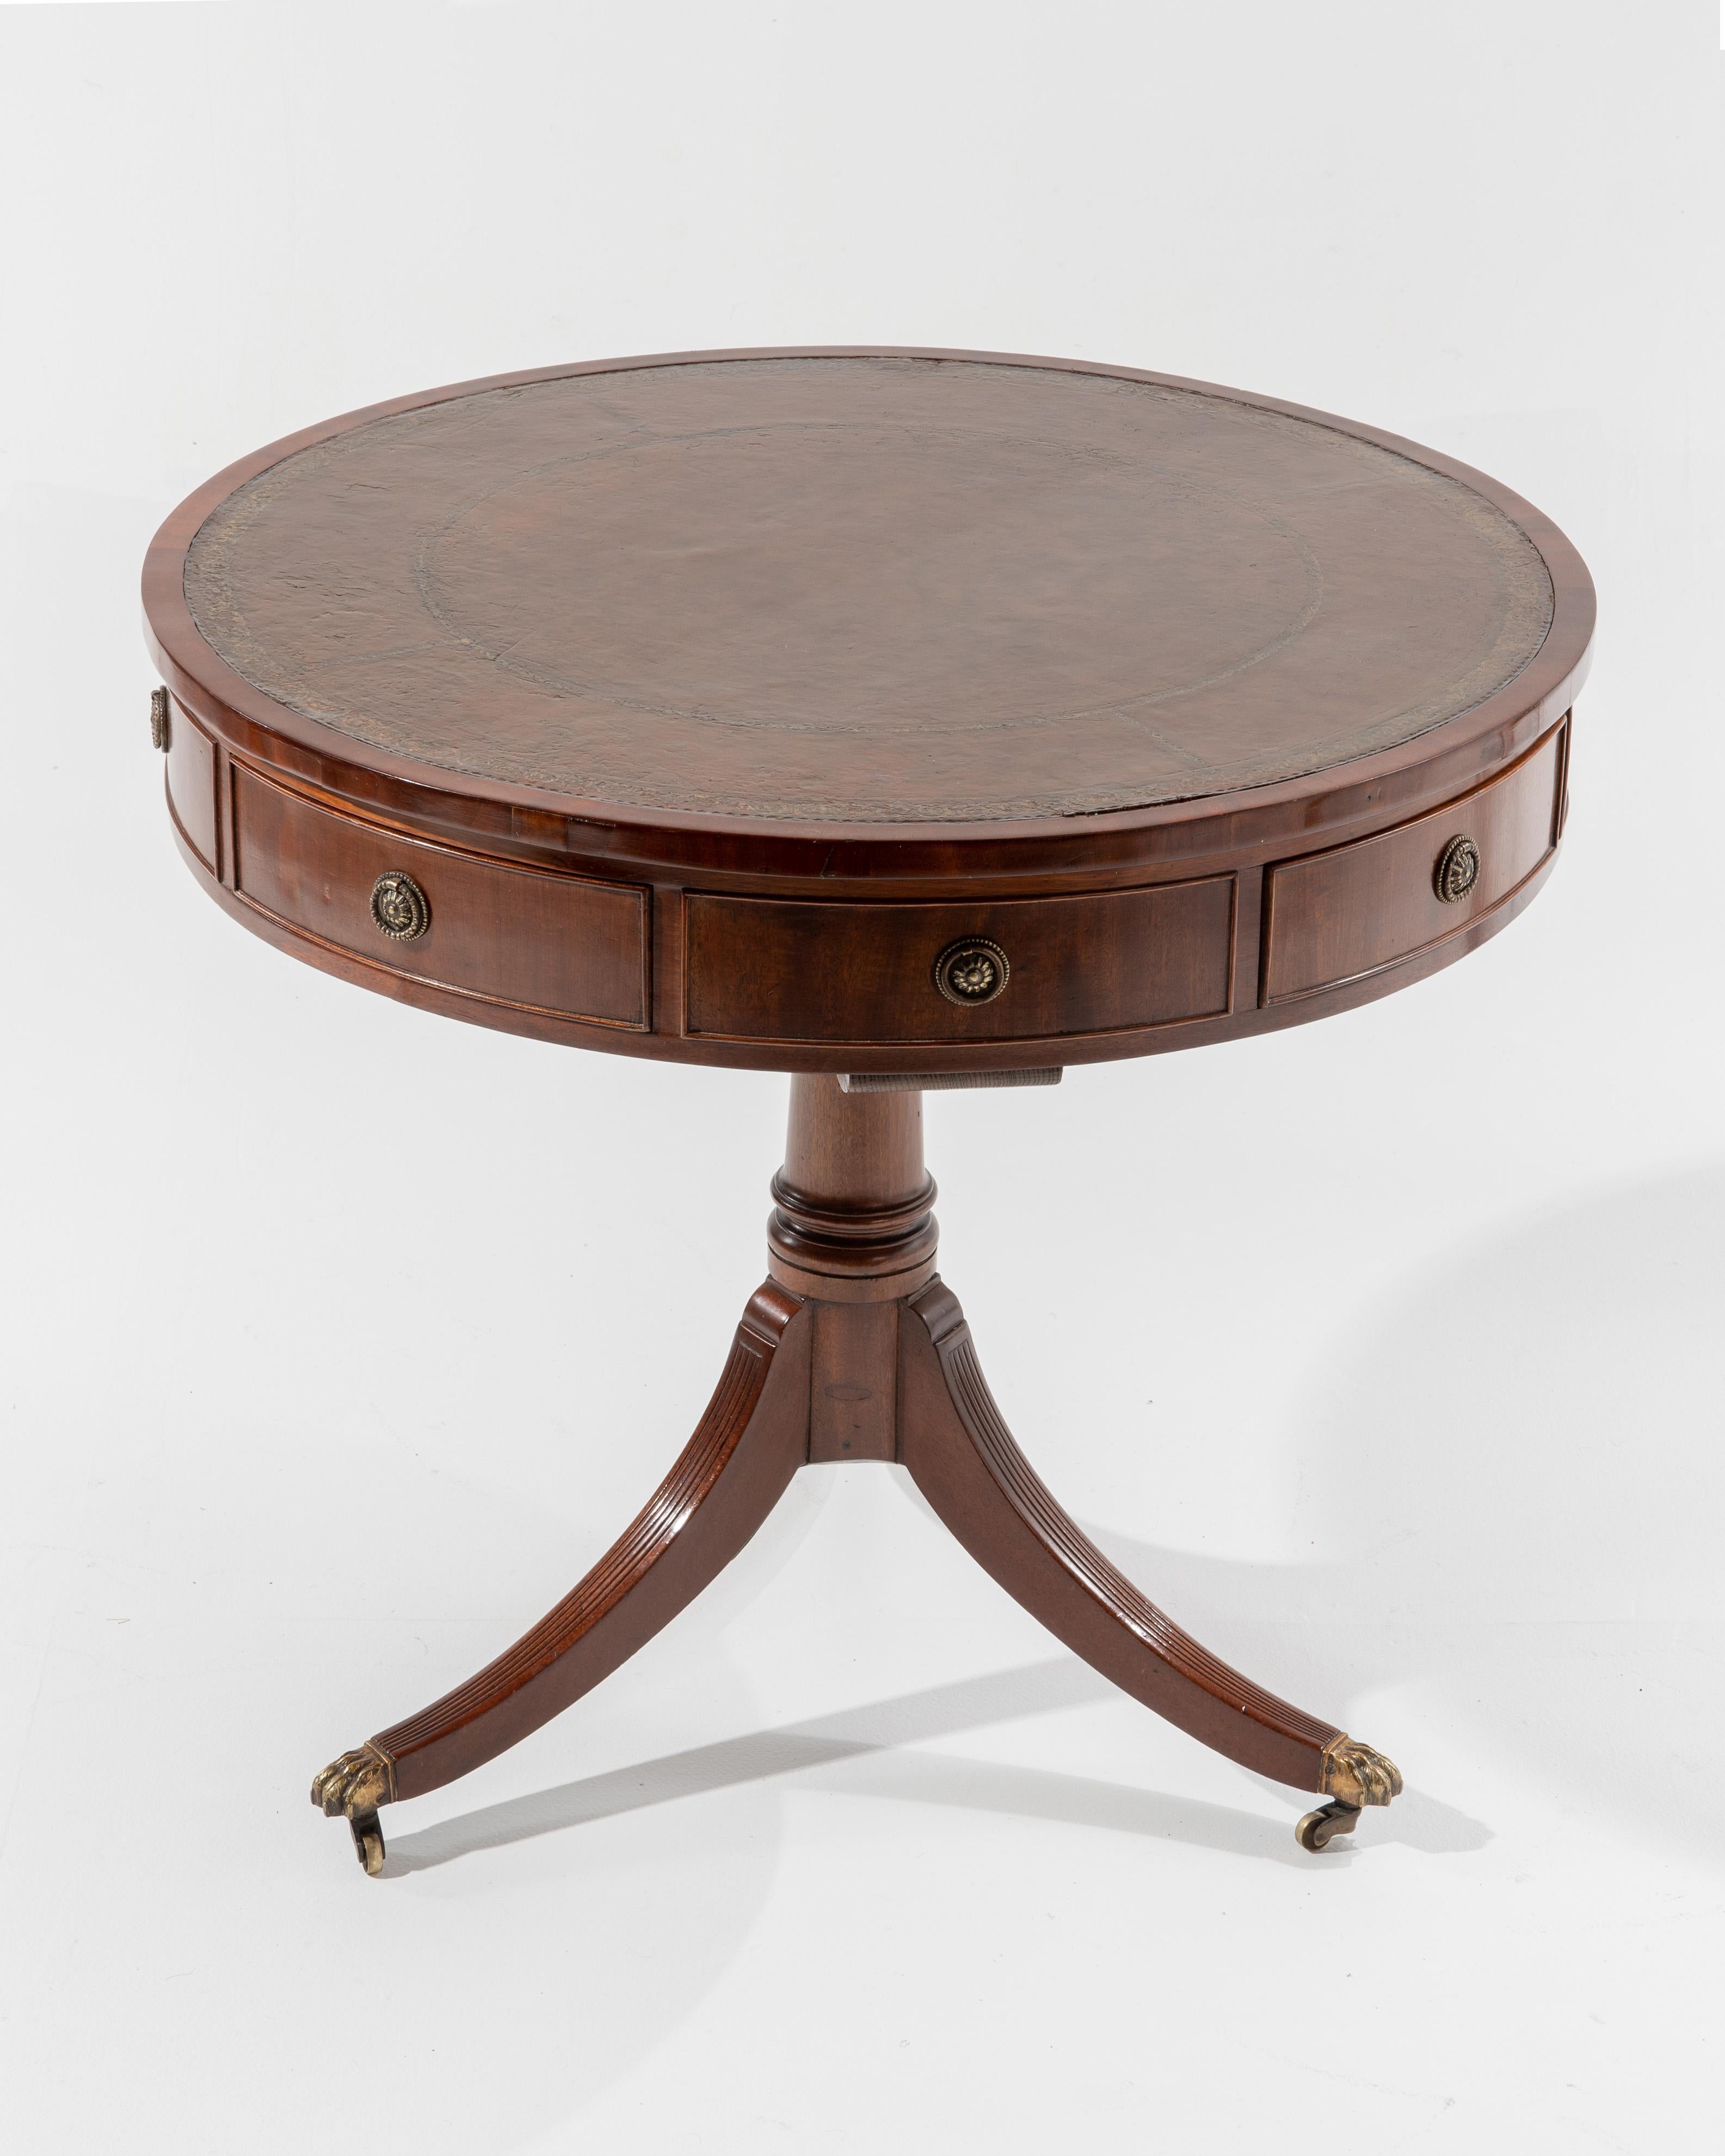 Early 20th Century Mahogany and Leather Rent Table